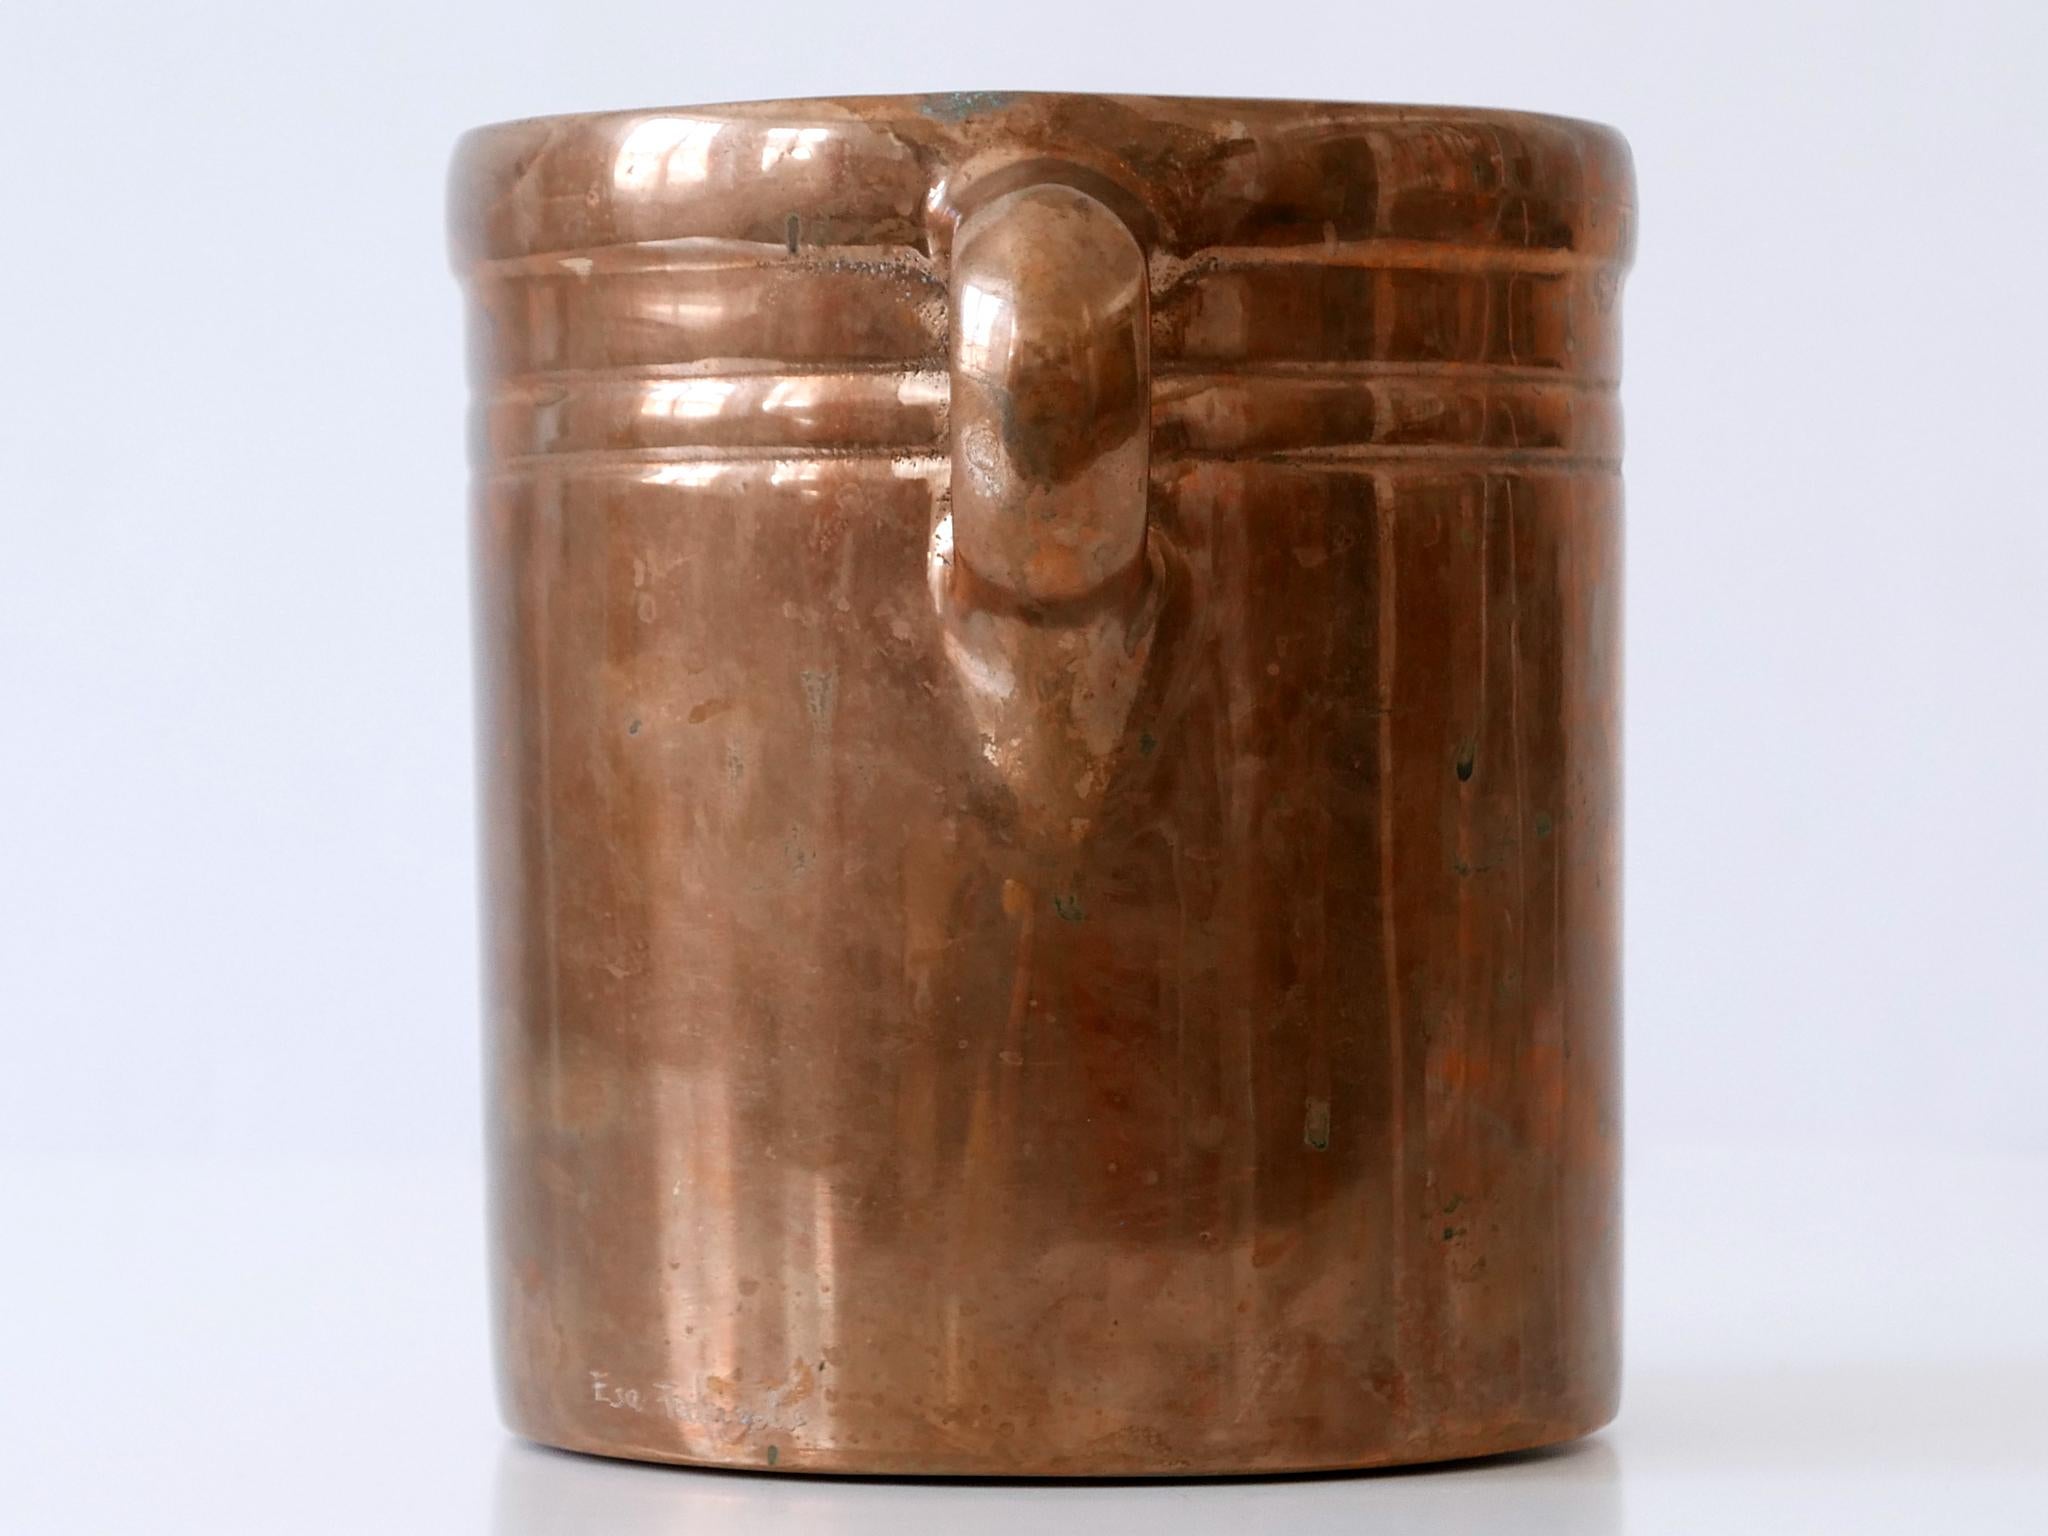 Exceptional Bronze Champagne Cooler or Ice Bucket by Esa Fedrigolli for Esart For Sale 1